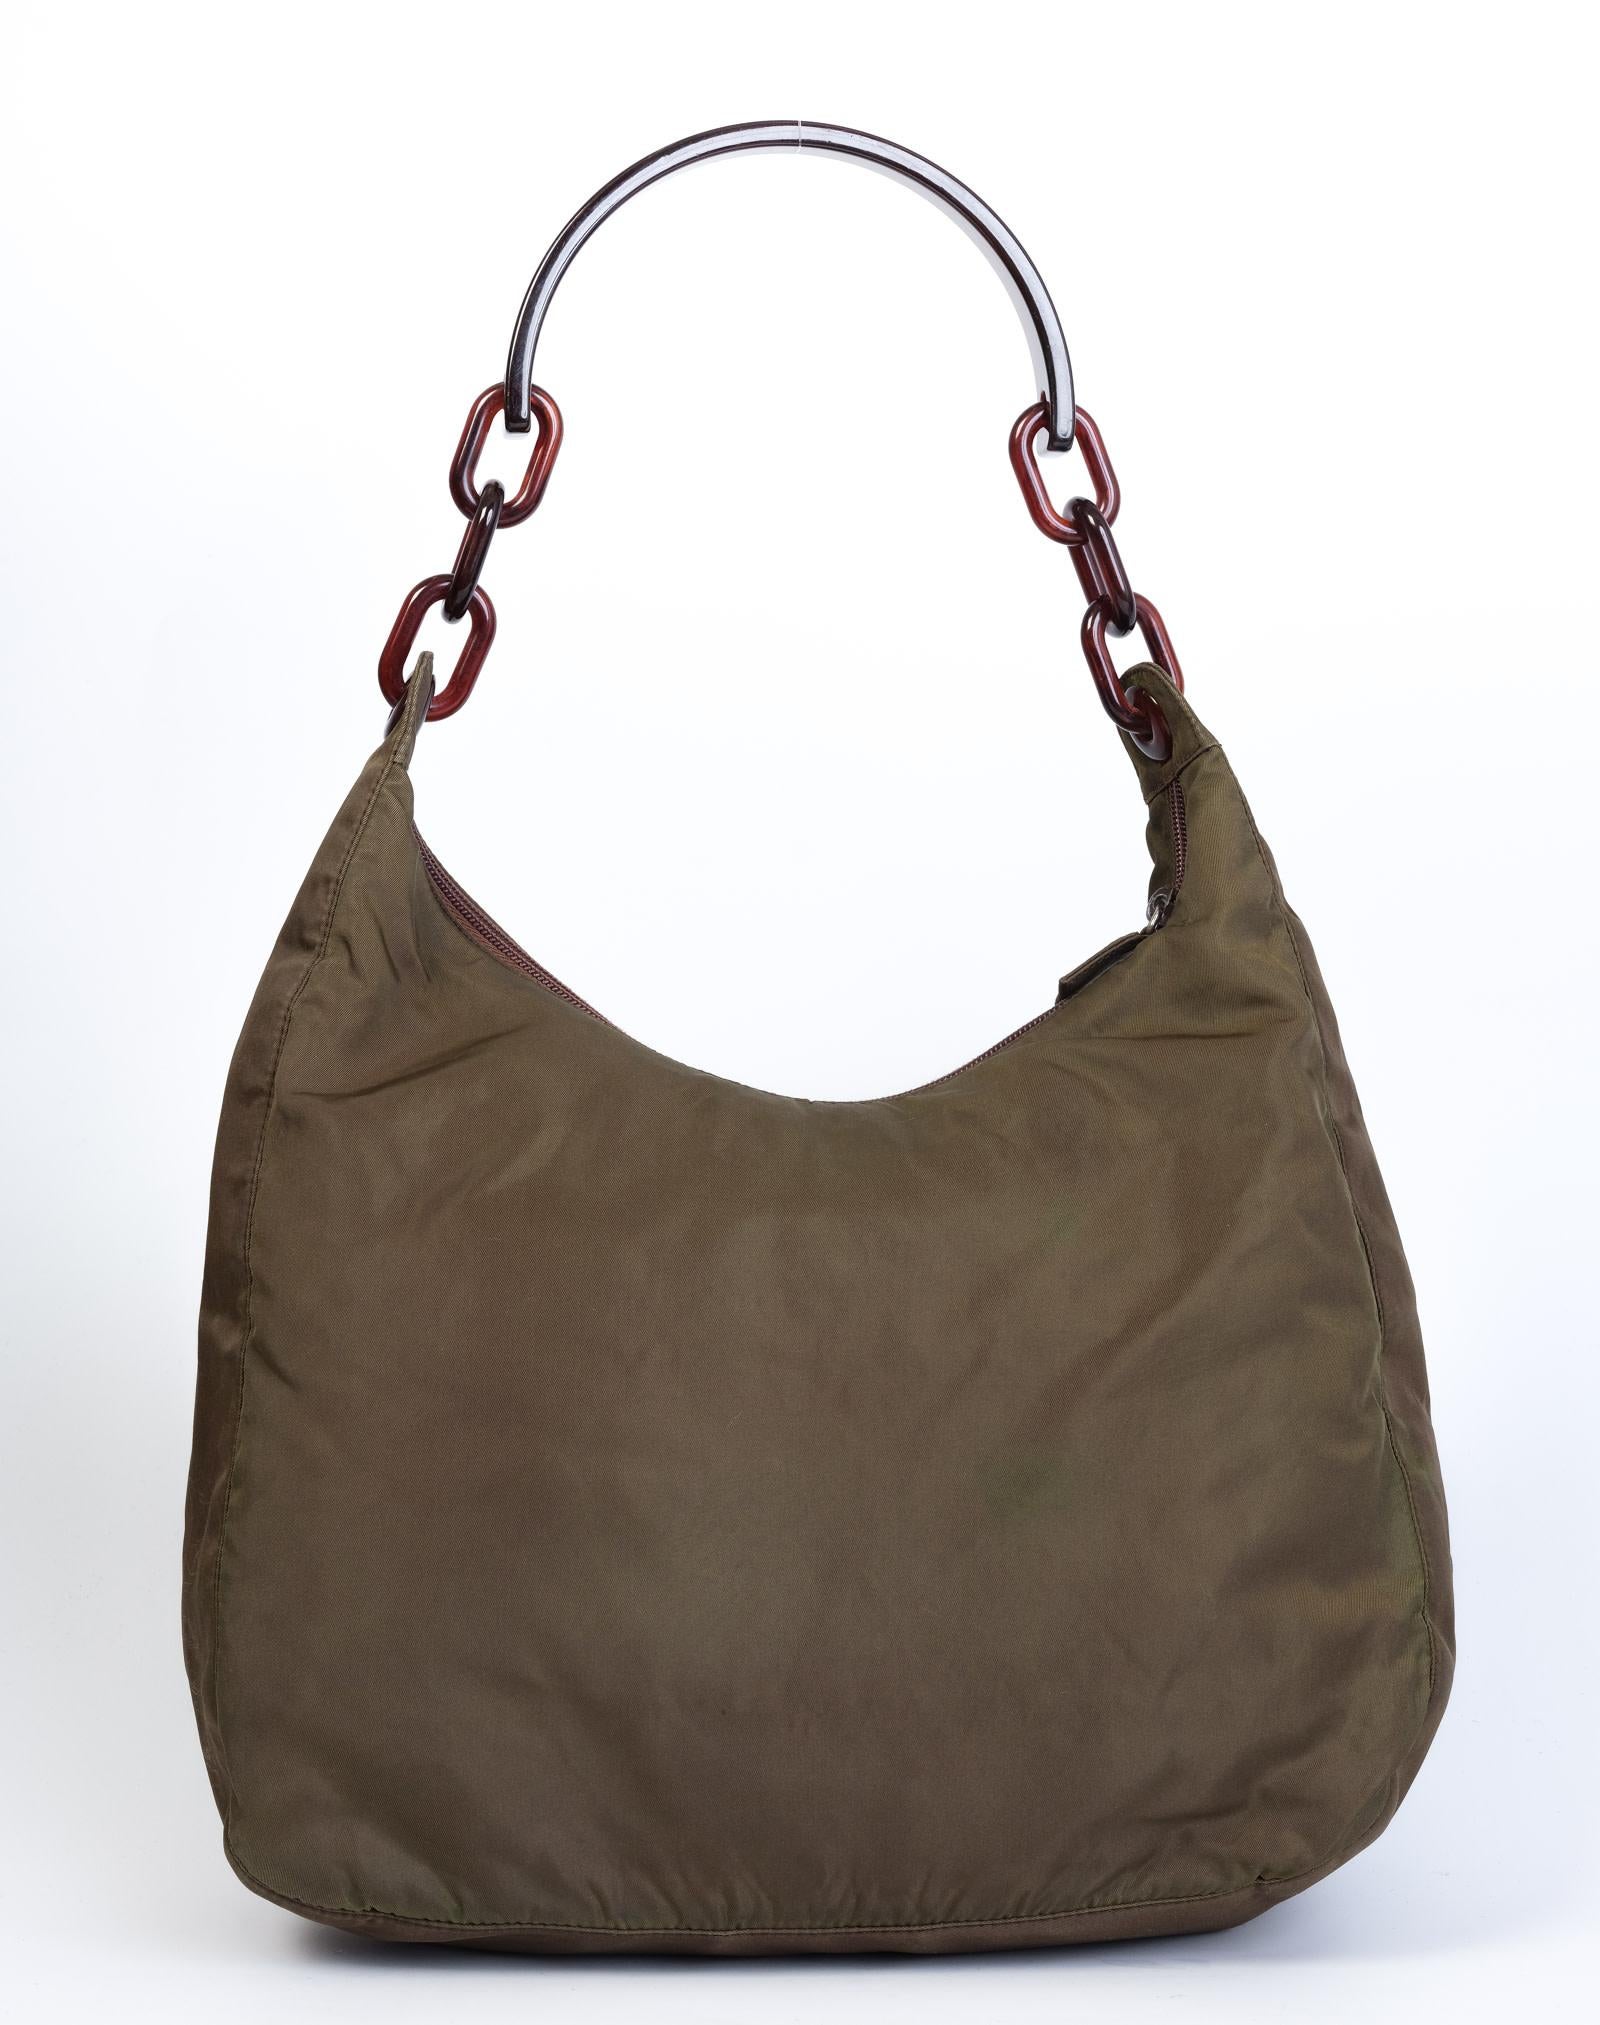 This bag is made with khaki nylon and features a tortoise shell chain handle, top zip closure and one main compartment with additional zip pockets.

COLOR: Green
MATERIAL: Nylon
ITEM CODE: N
MEASURES: H 11” x L 9” x D 4”
DROP: 10”
CONDITION: Good -